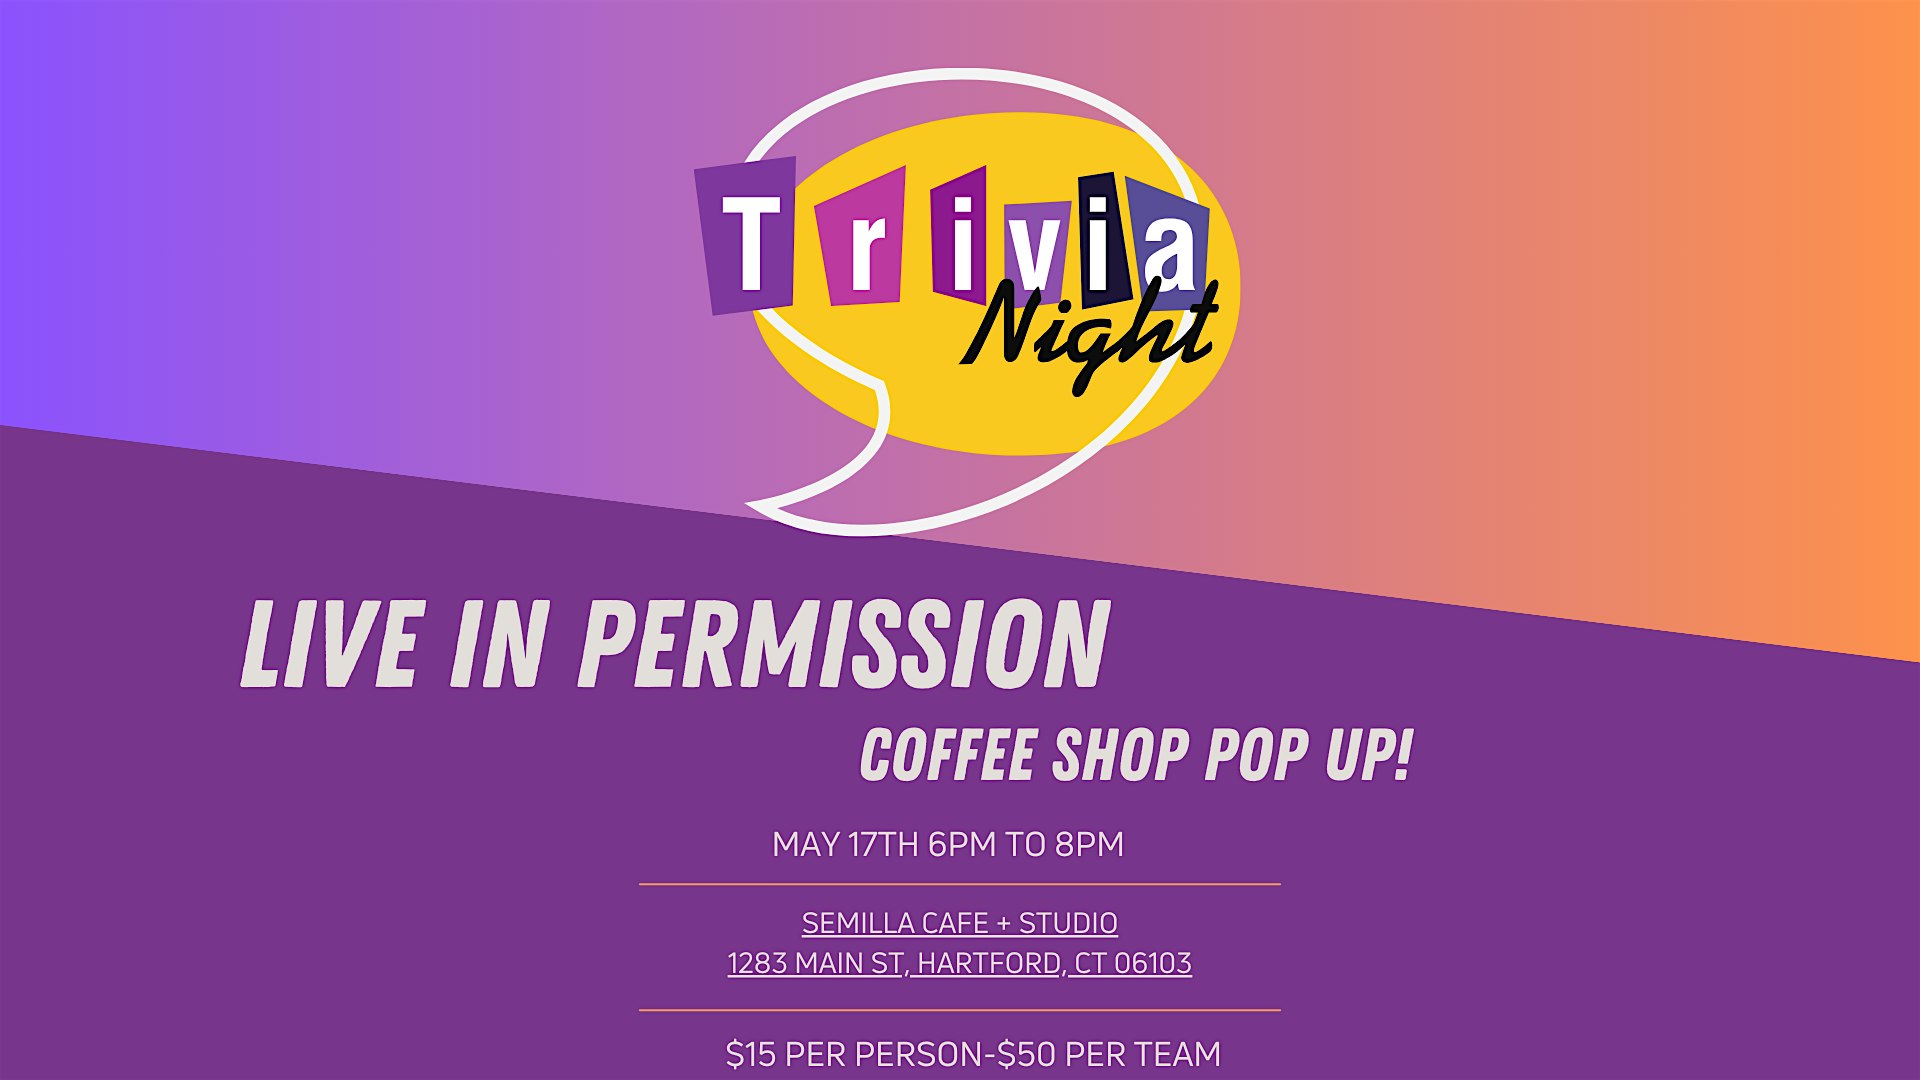 Live in Permission Coffee Shop Pop Up!